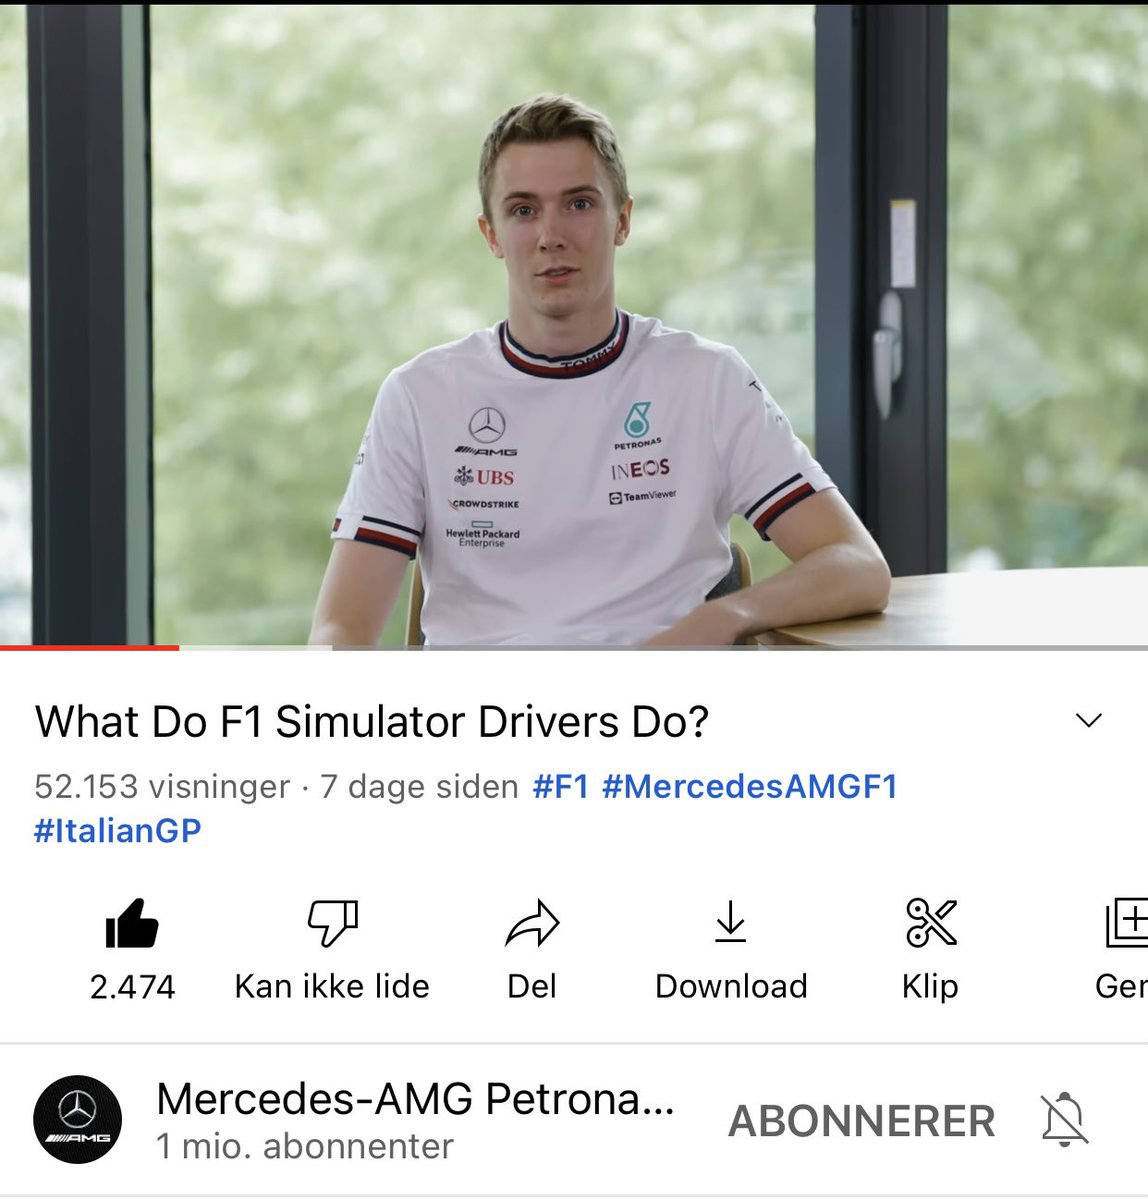 Check out this video on how much preparation that goes into a F1 weekend in the F1 simulator at Mercedes-AMG Petronas Formula One Team🏎️ Video: youtu.be/1MCptQ8JWTk